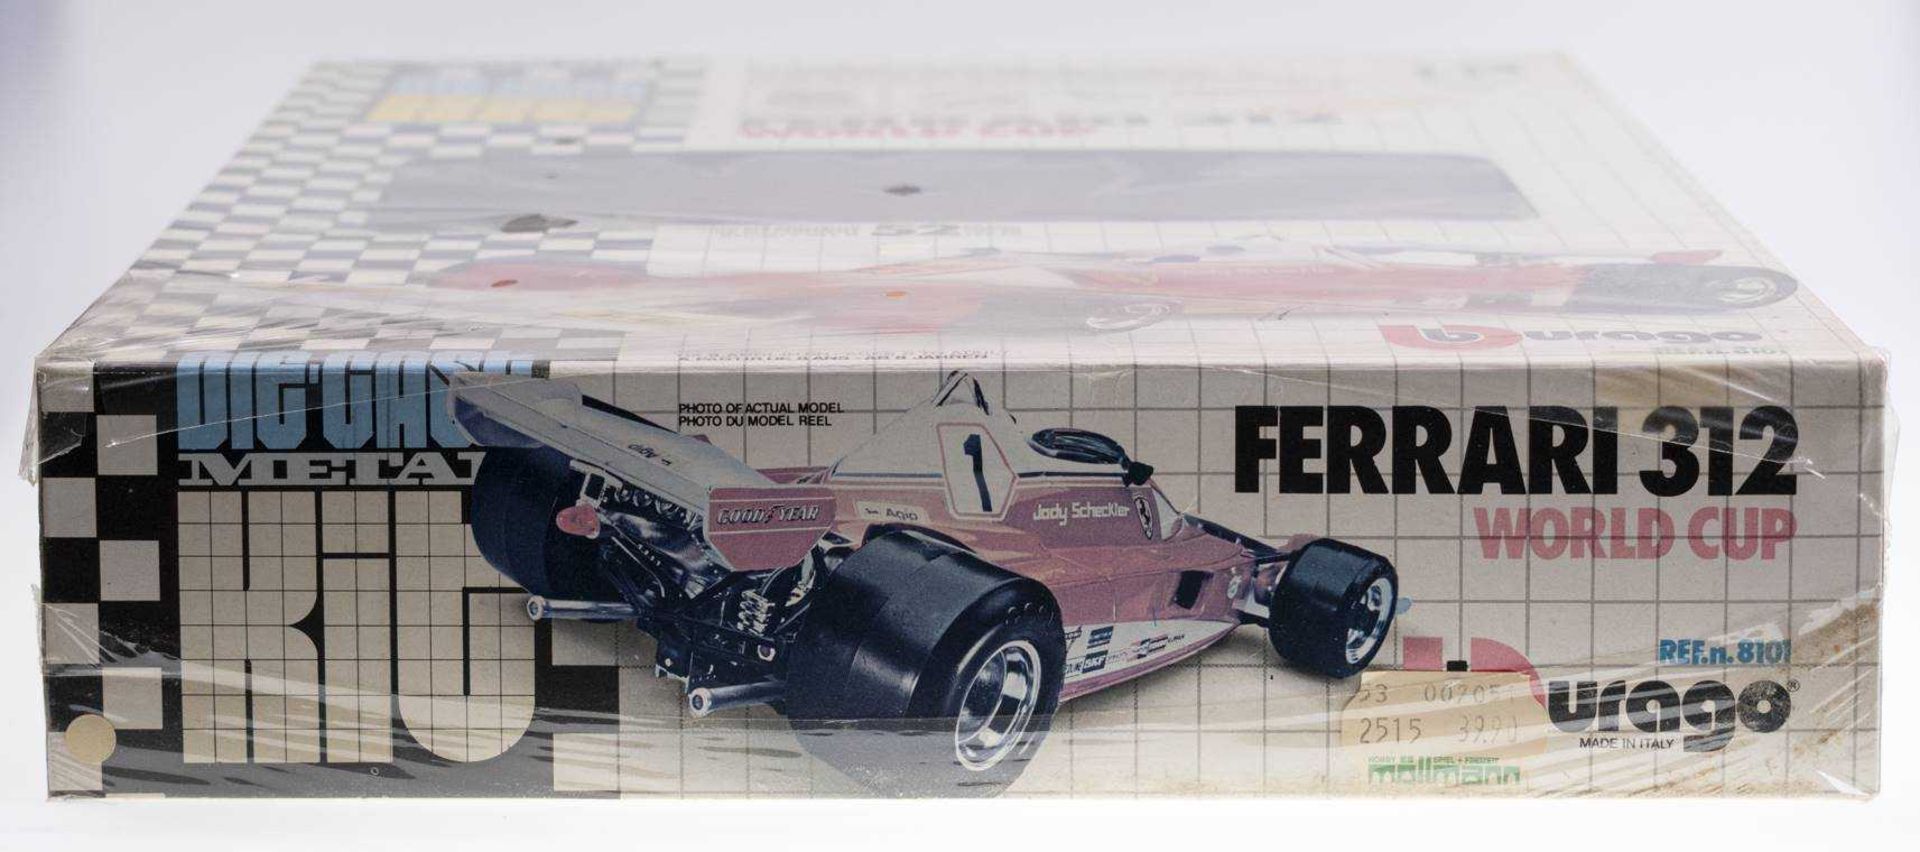 FERRARI 312 WORLD CUP (Jody Scheckter) as unopened assembly in old the Cast original packaging (thes - Image 3 of 3